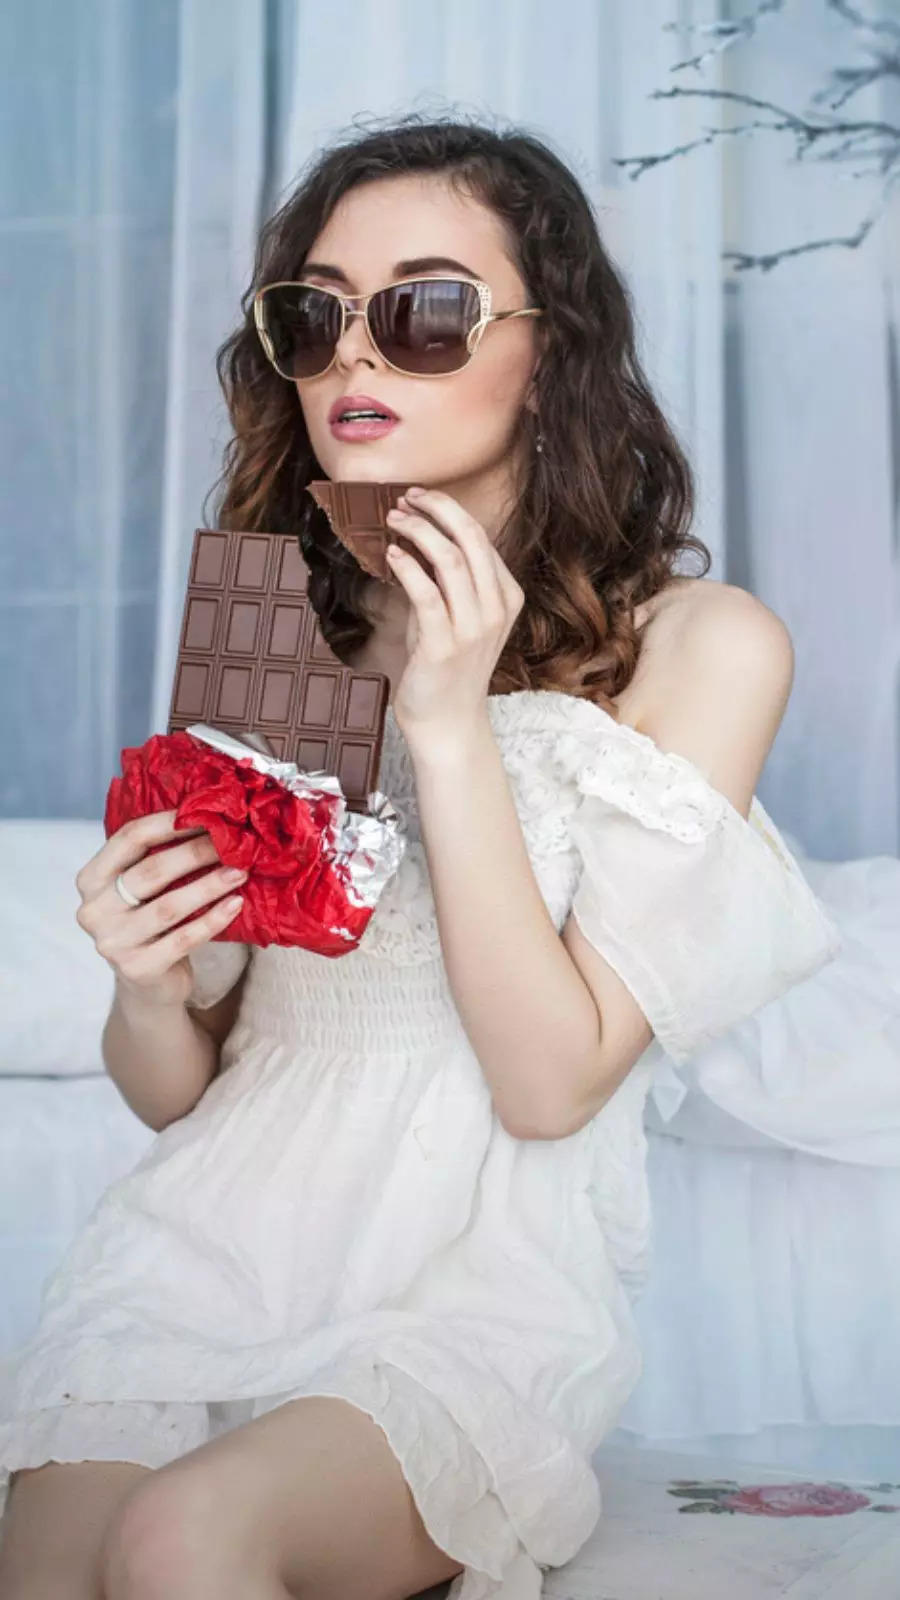 Rs 1 lakh! Most expensive chocolates in the world